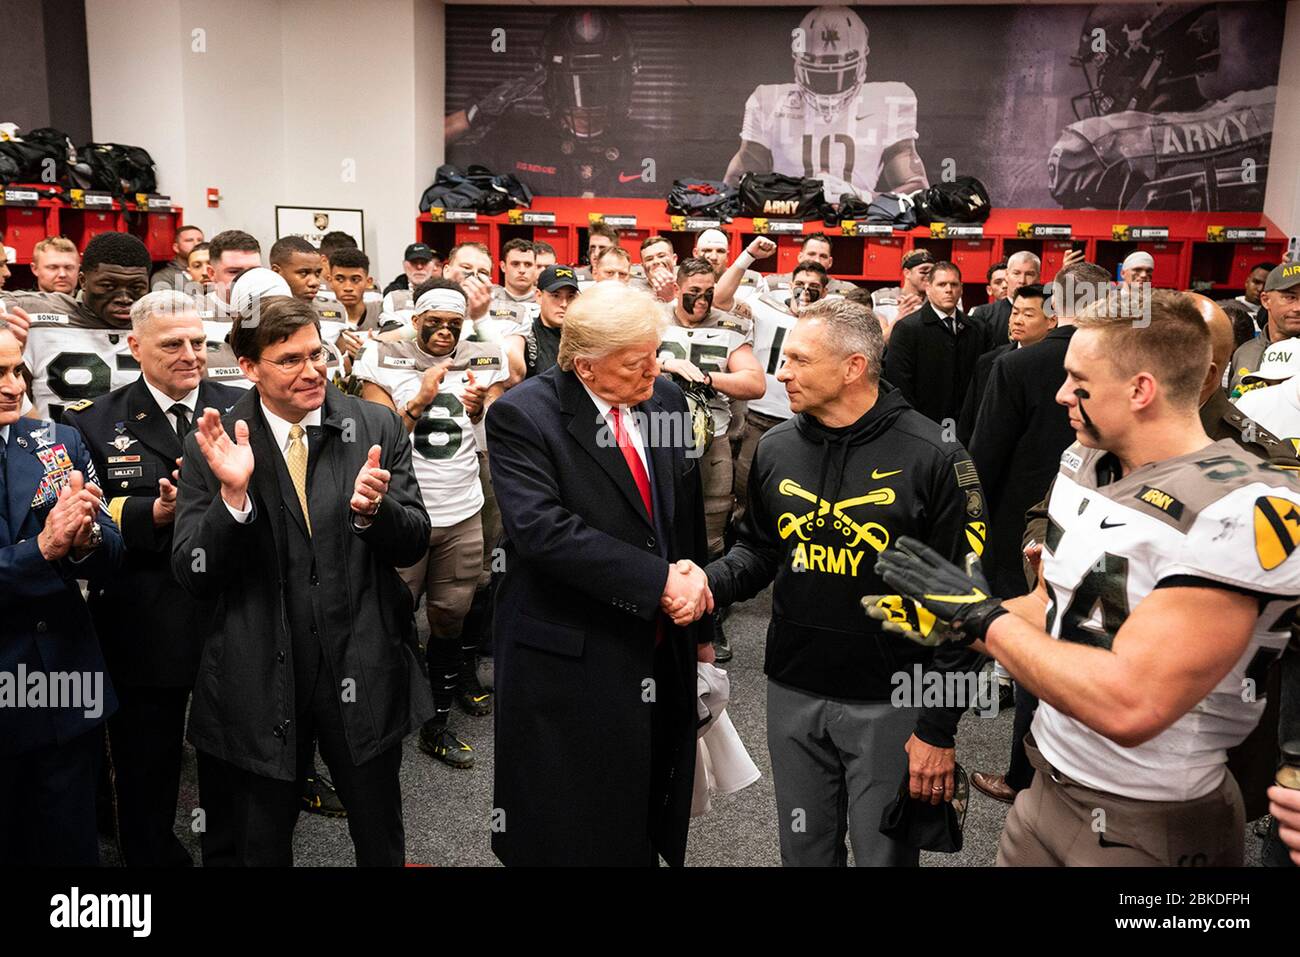 President Donald J. Trump, joined by Secretary of Defense Mark Esper, shakes hnads with coach Jeff Monken as he meets with members of the U.S. Army football team in their locker room prior to the start of the 120th Army-Navy football game at Lincoln Financial Field in Philadelphia, Pa. President Trump at the Army-Navy Football Game Stock Photo